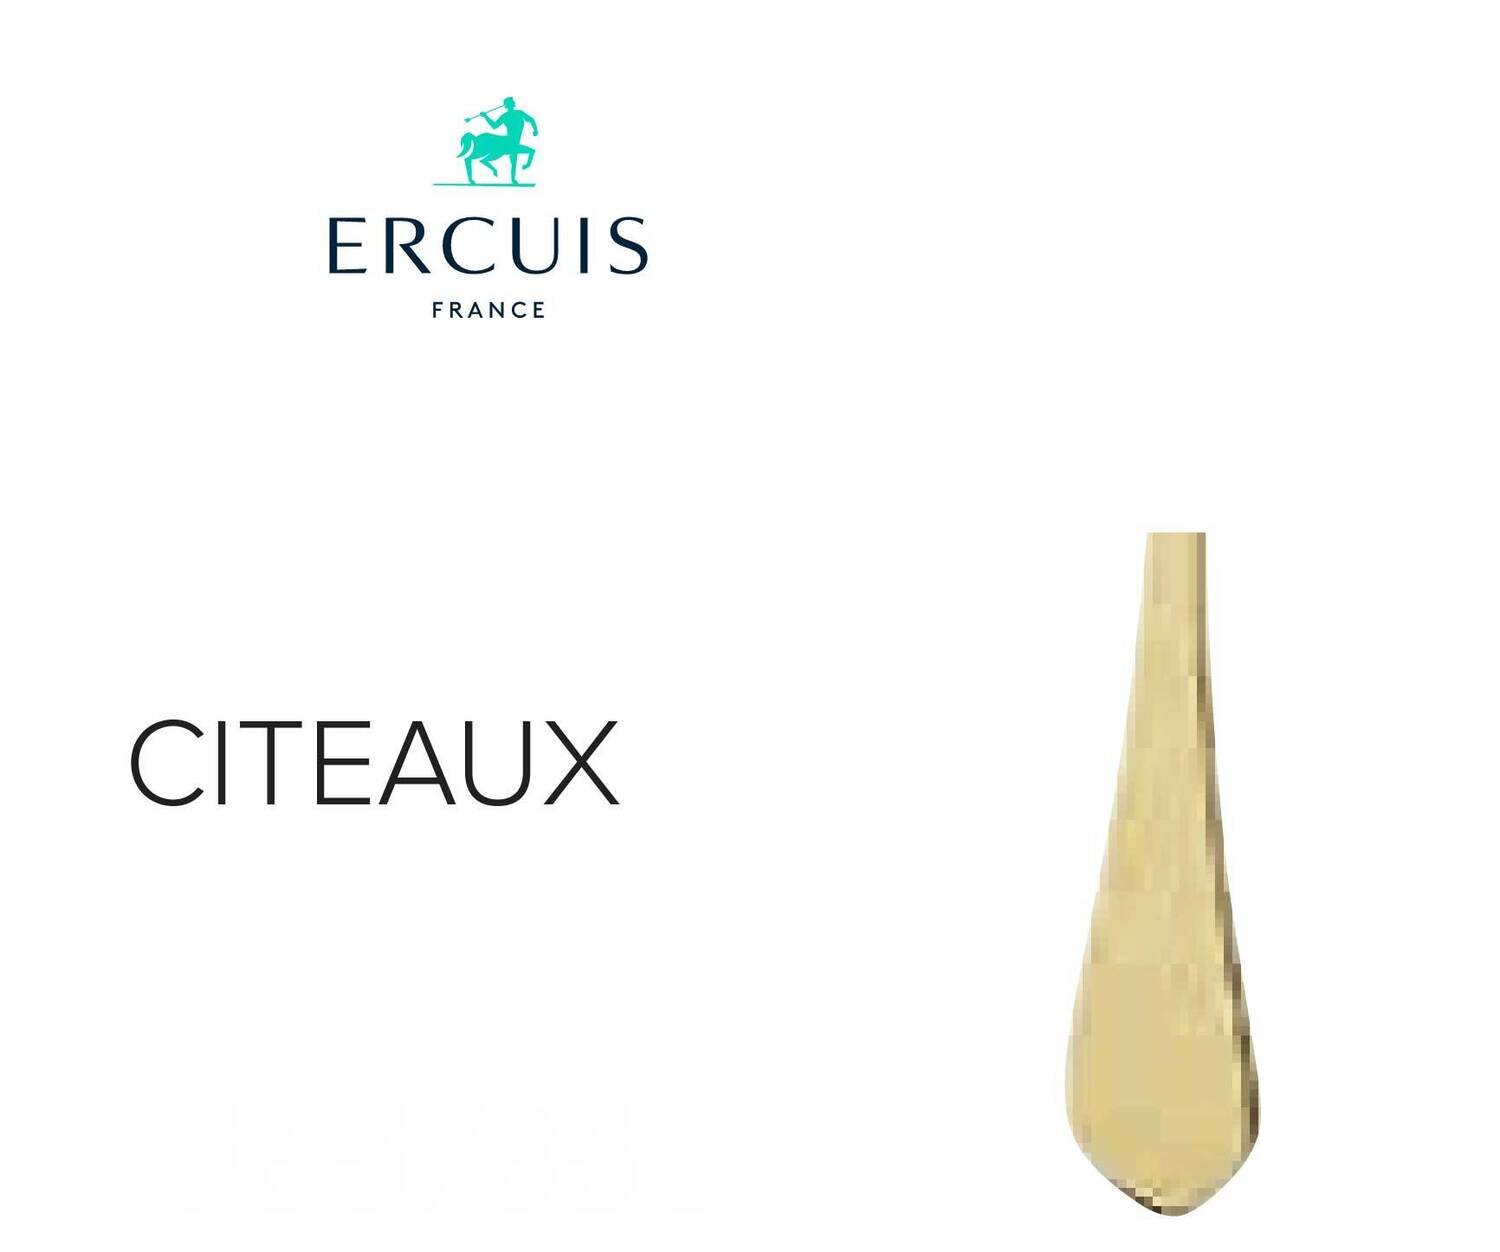 Ercuis Citeaux Oyster Fork Gold Plated F657350-22